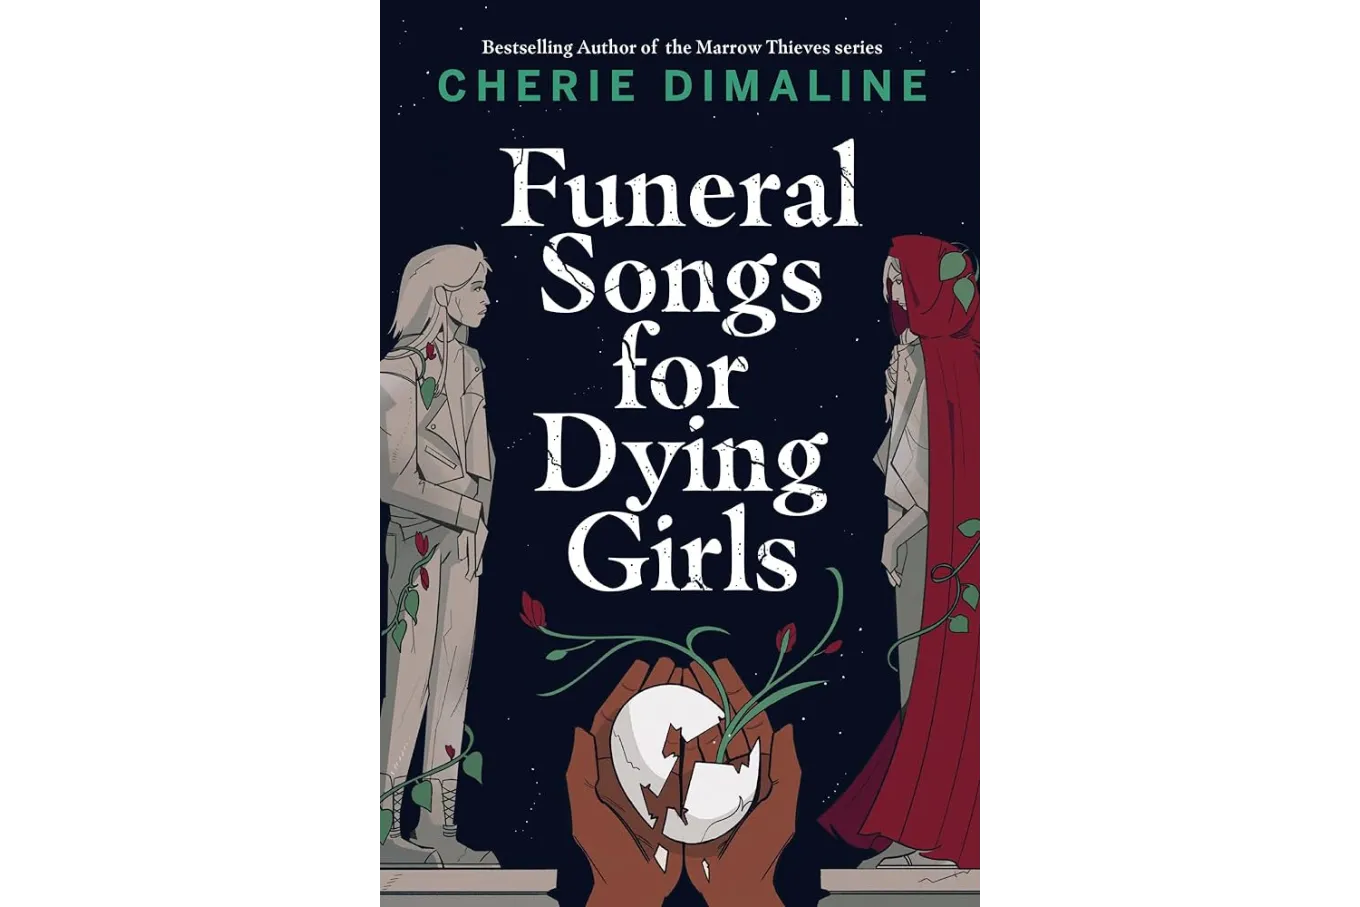 Cover of Funeral Songs for Dying Girls